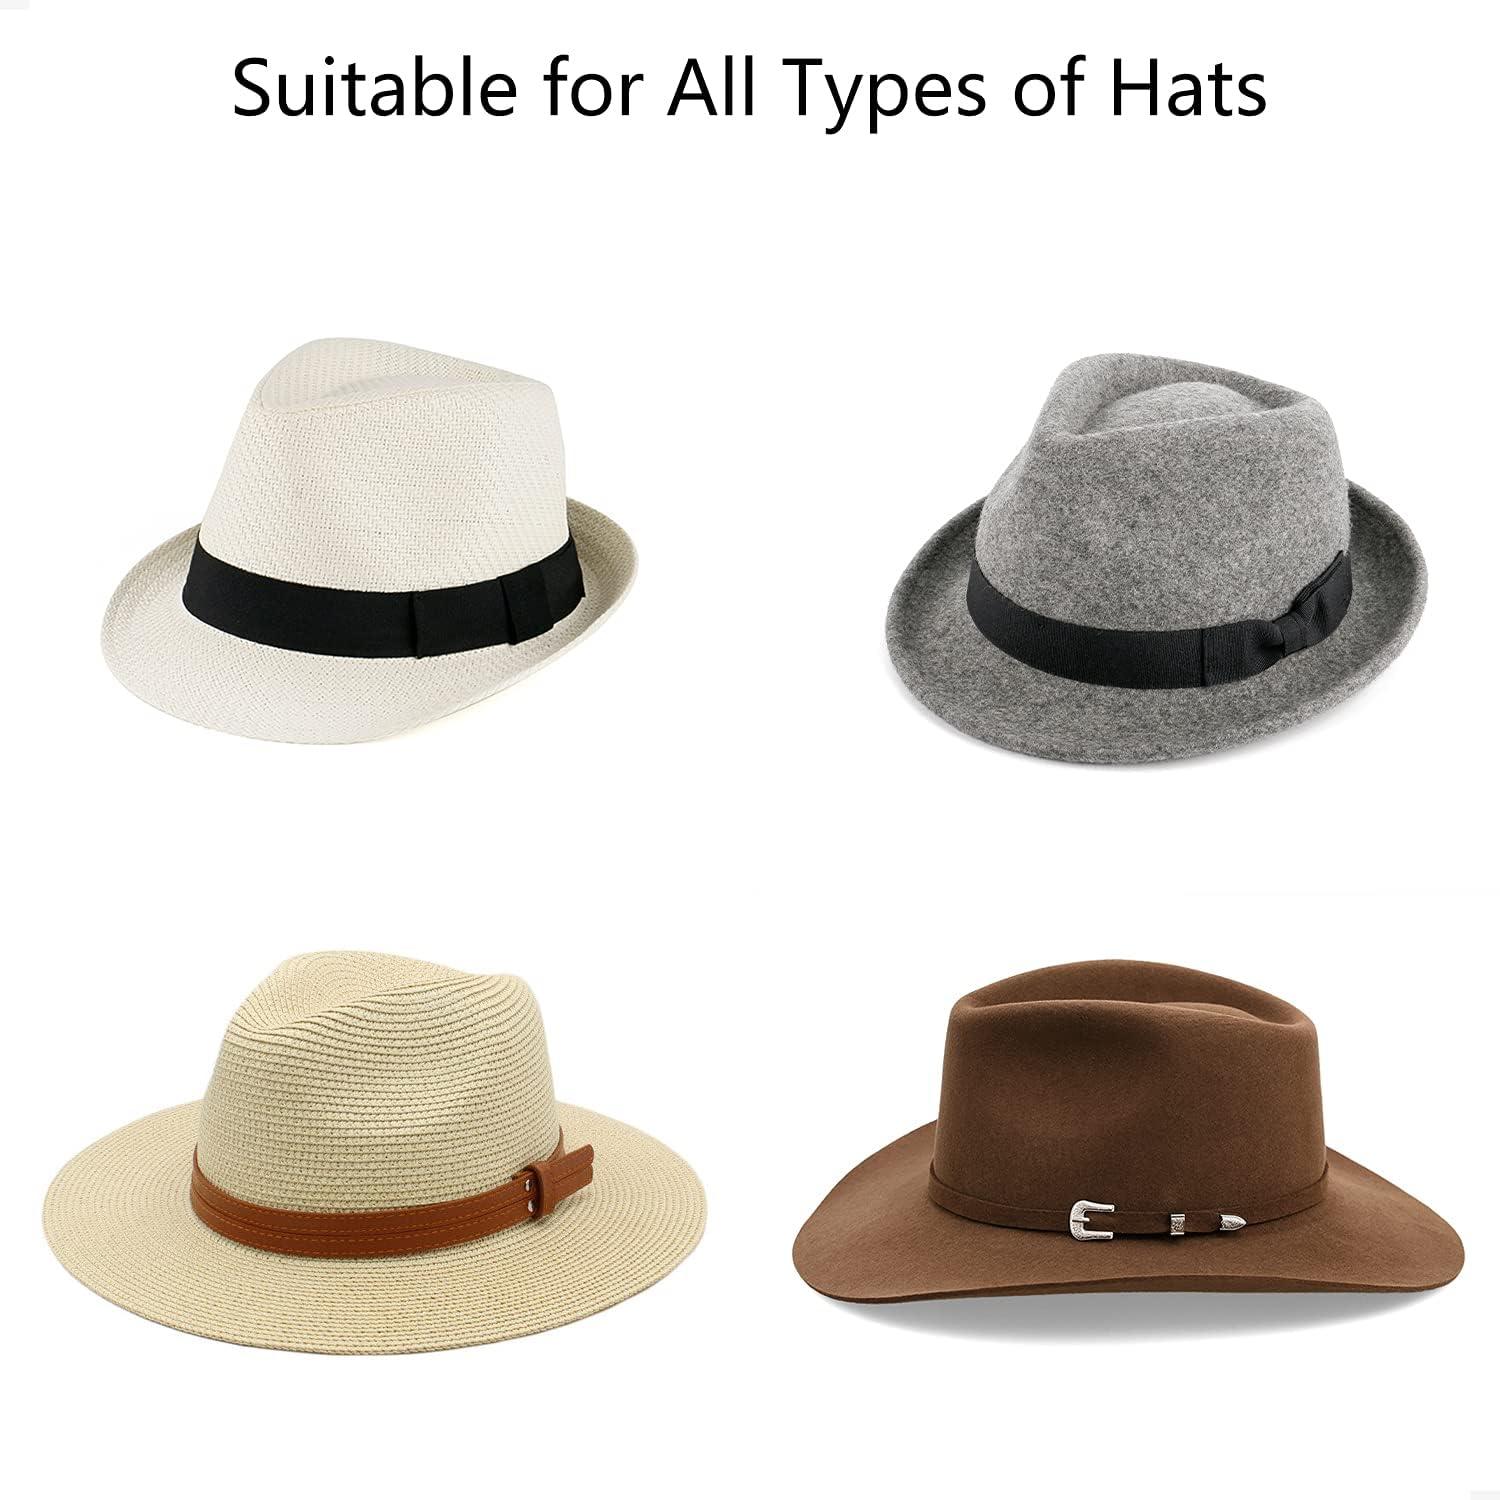 Hat Sizing Reducing Tape Inserts Make Fit Smaller Reducer Size Caps  Self-adhesive Adult Hats - AliExpress, Hat Inserts To Make Fit Smaller 